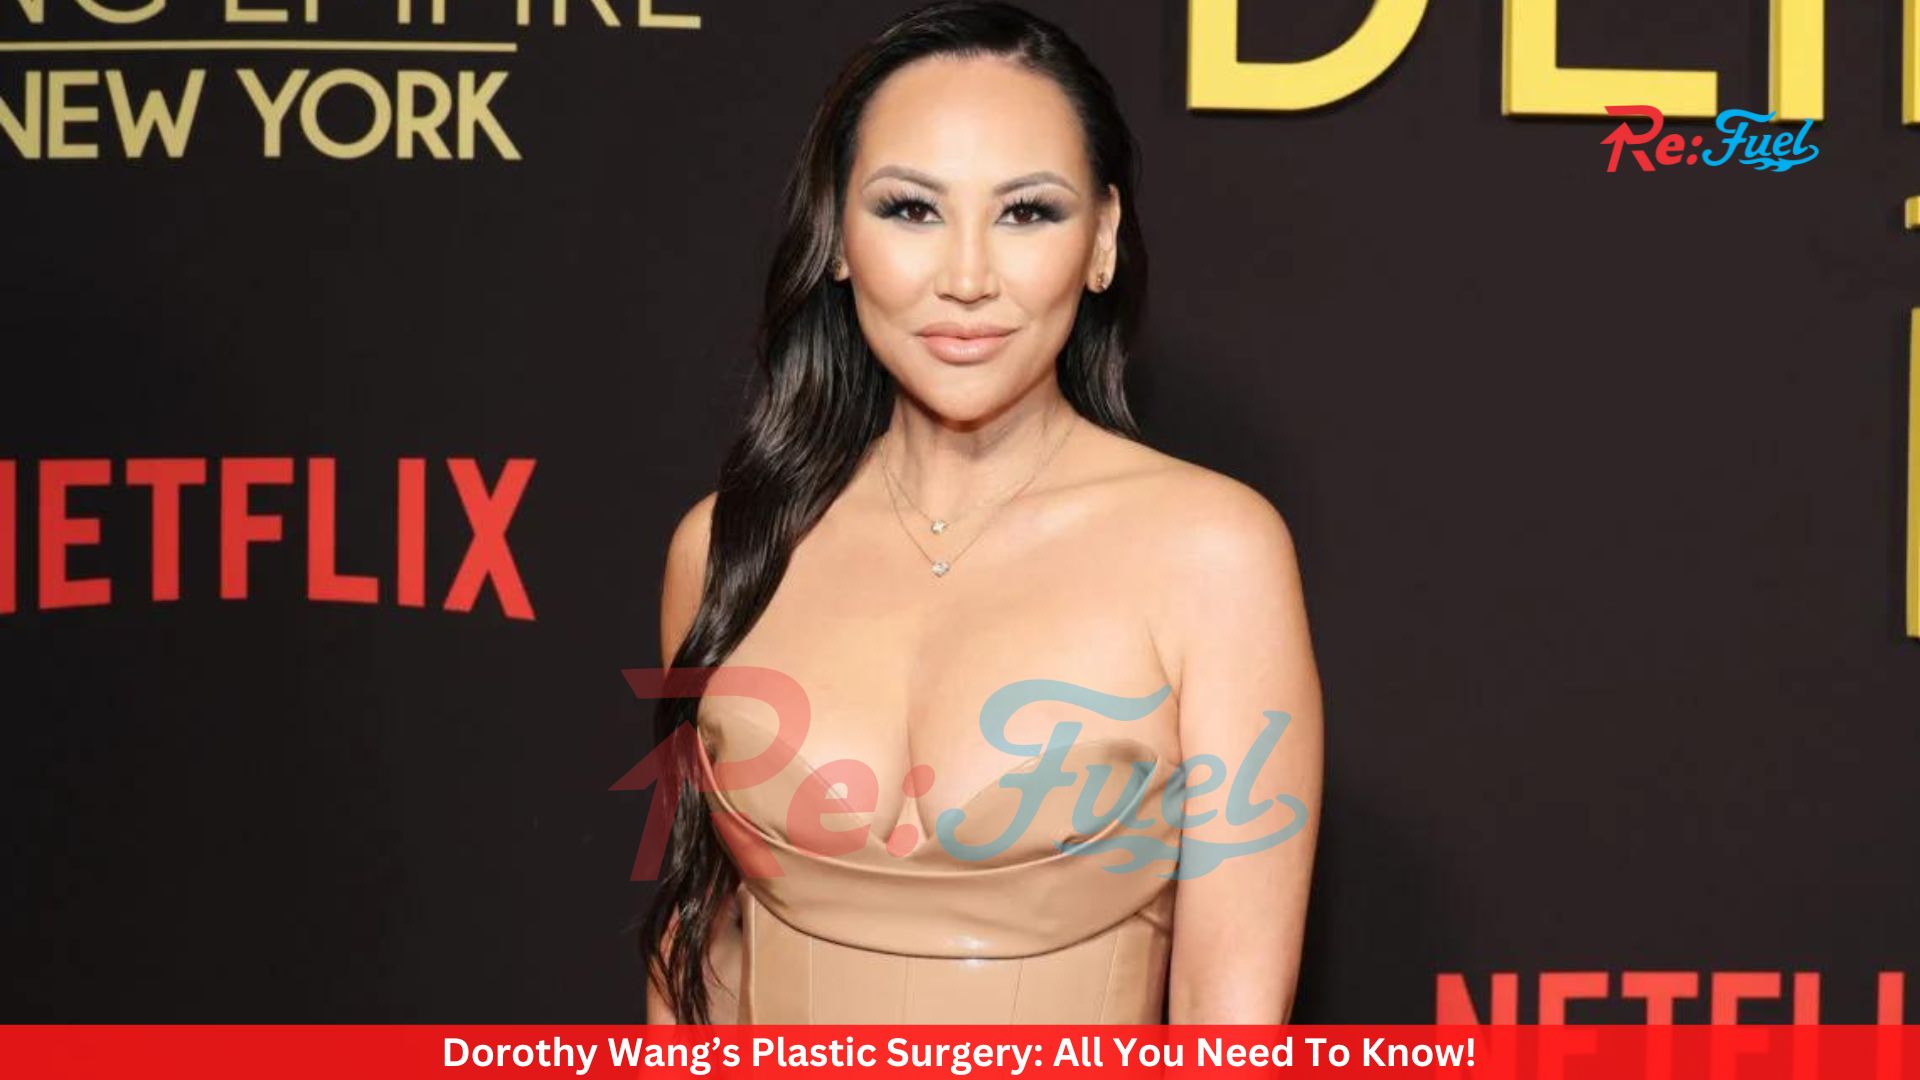 Dorothy Wang’s Plastic Surgery: All You Need To Know!